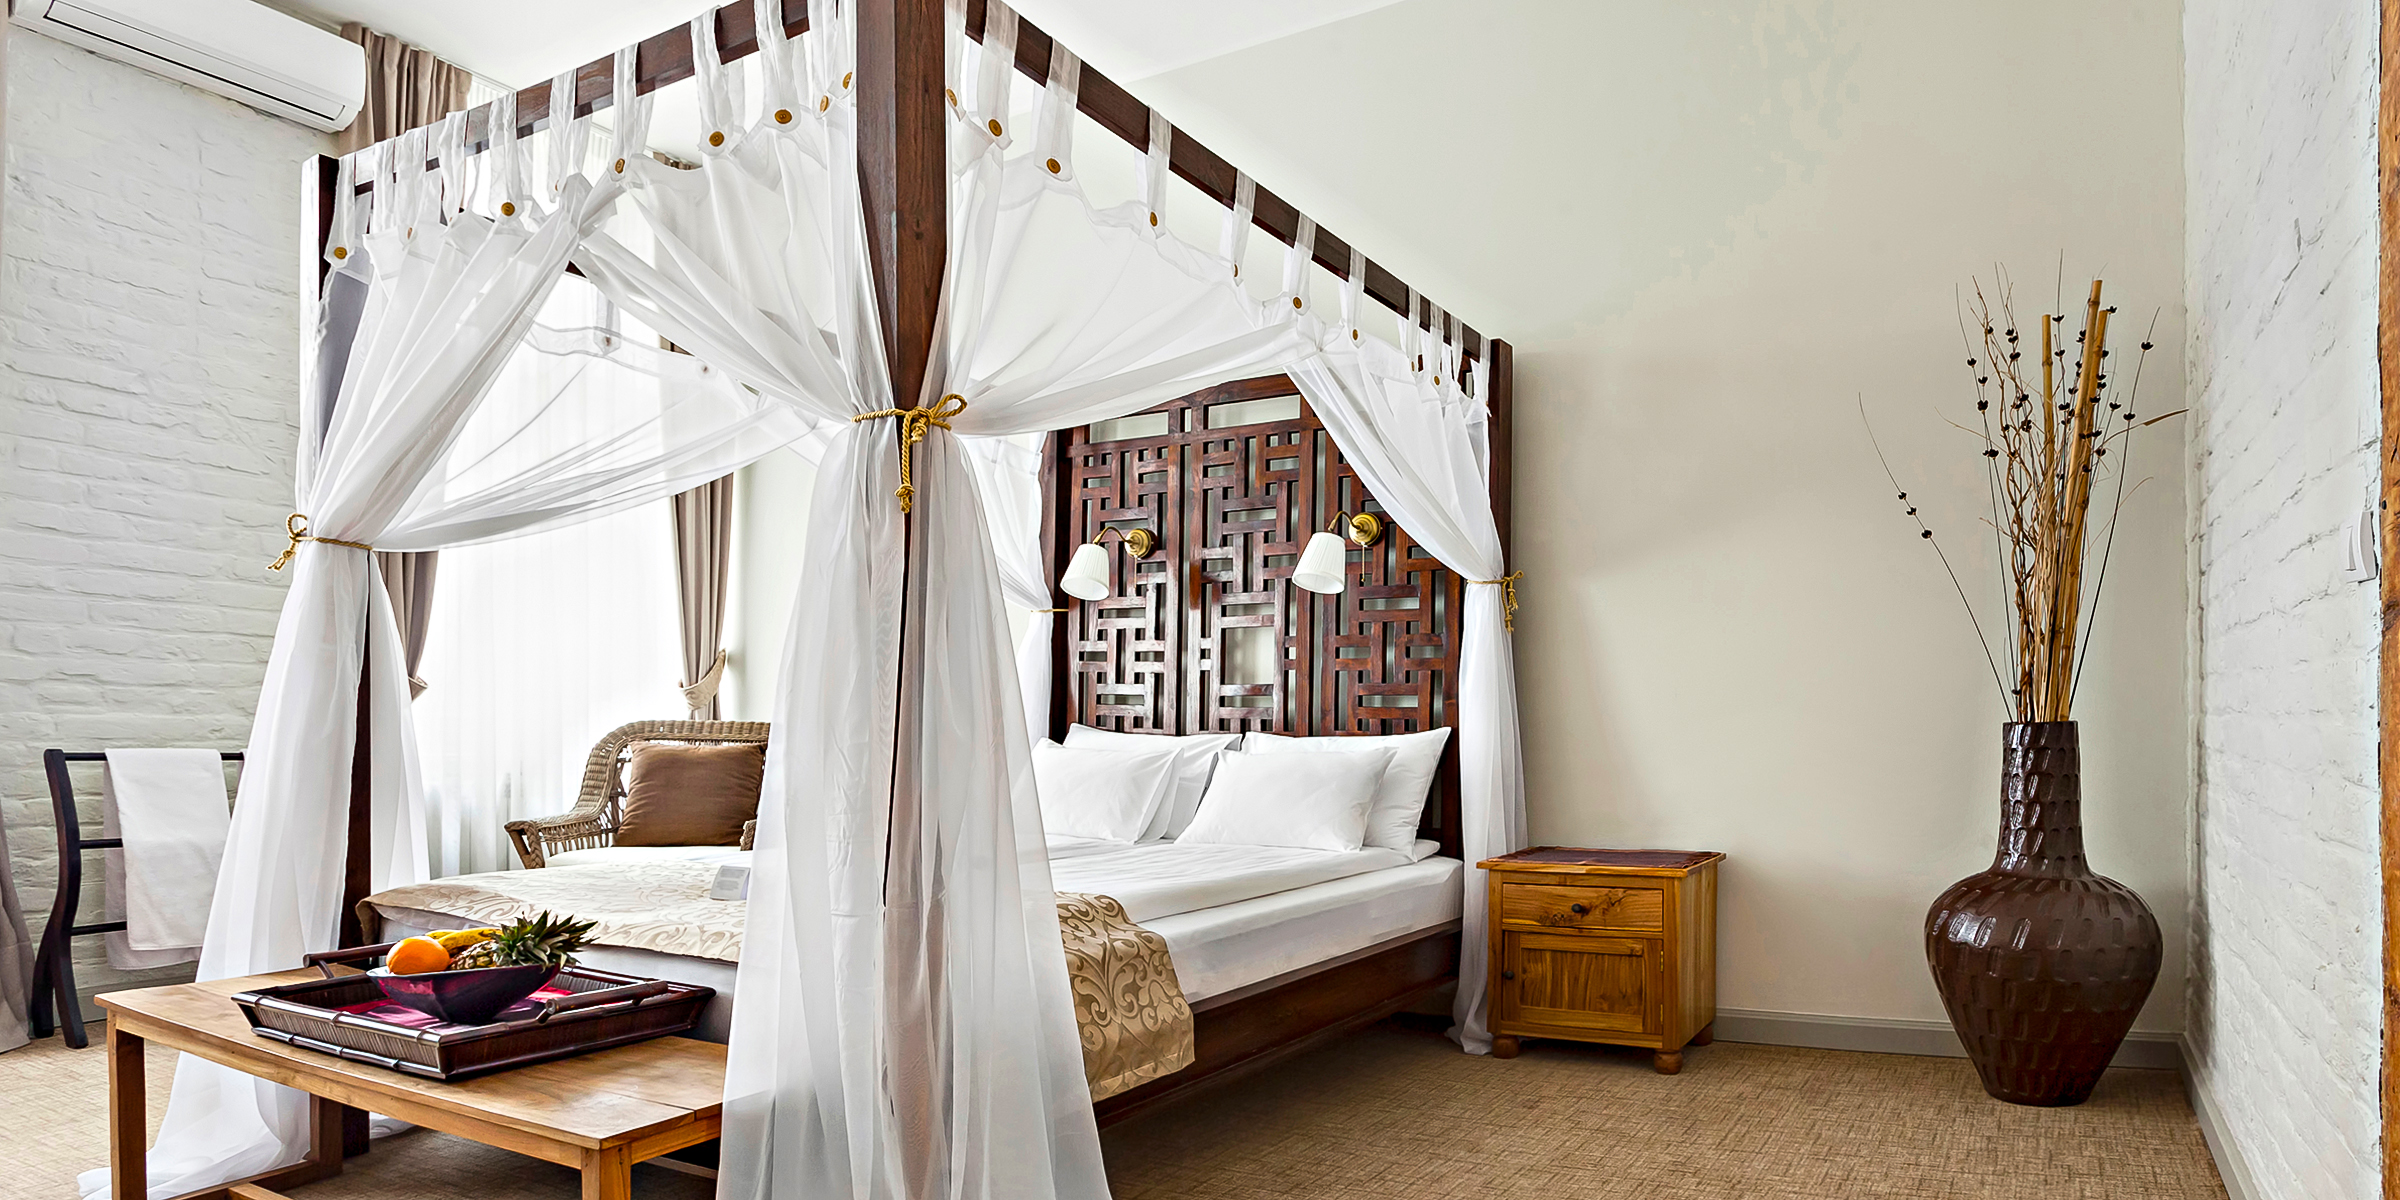 A canopy bed | Source: Shutterstock